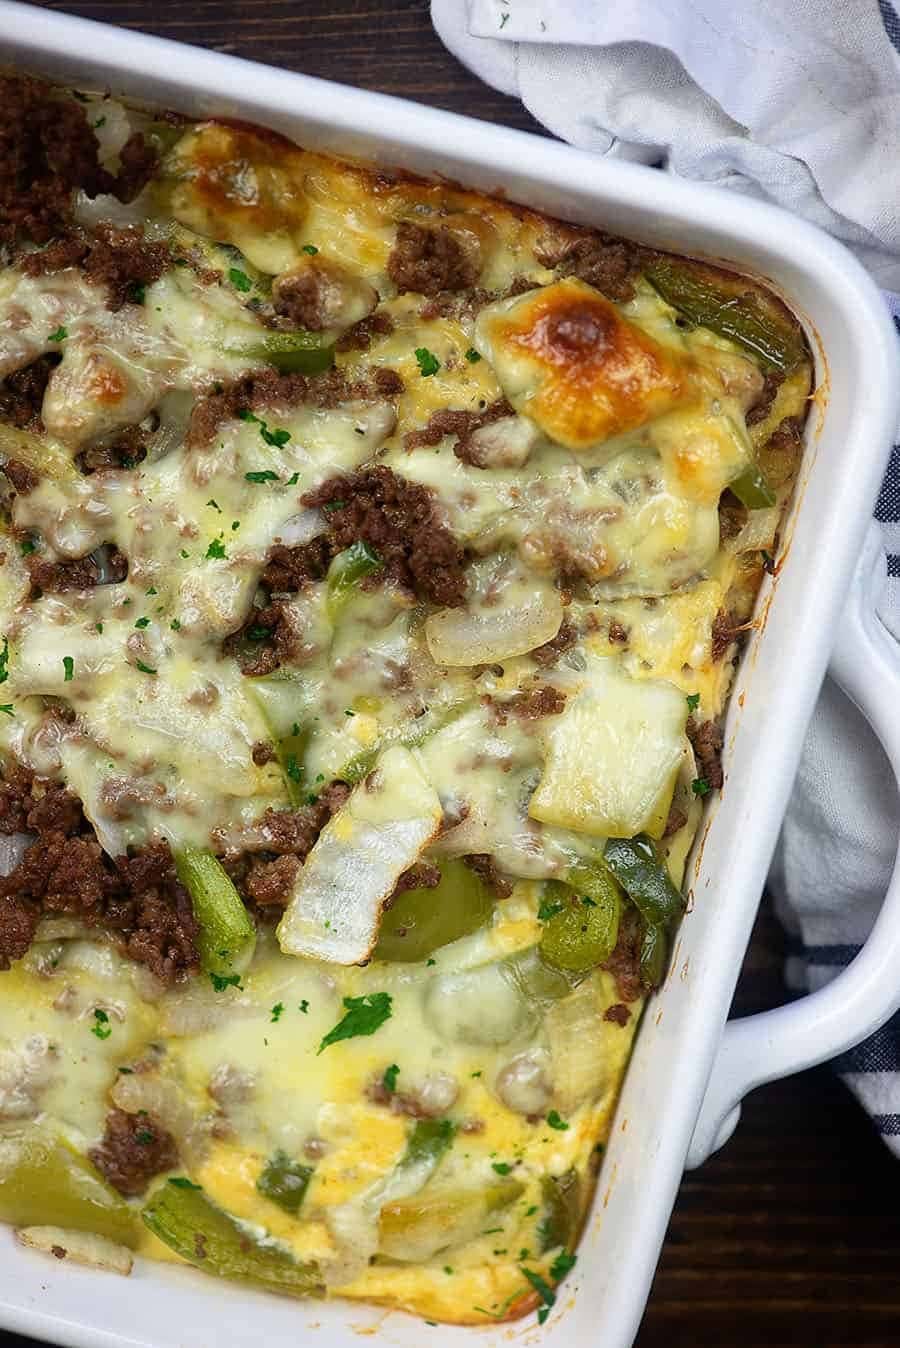 Top view of Philly Cheesesteak Casserole made with melted mix of beef, bell peppers, garlic, onions, and lots of cheese. 